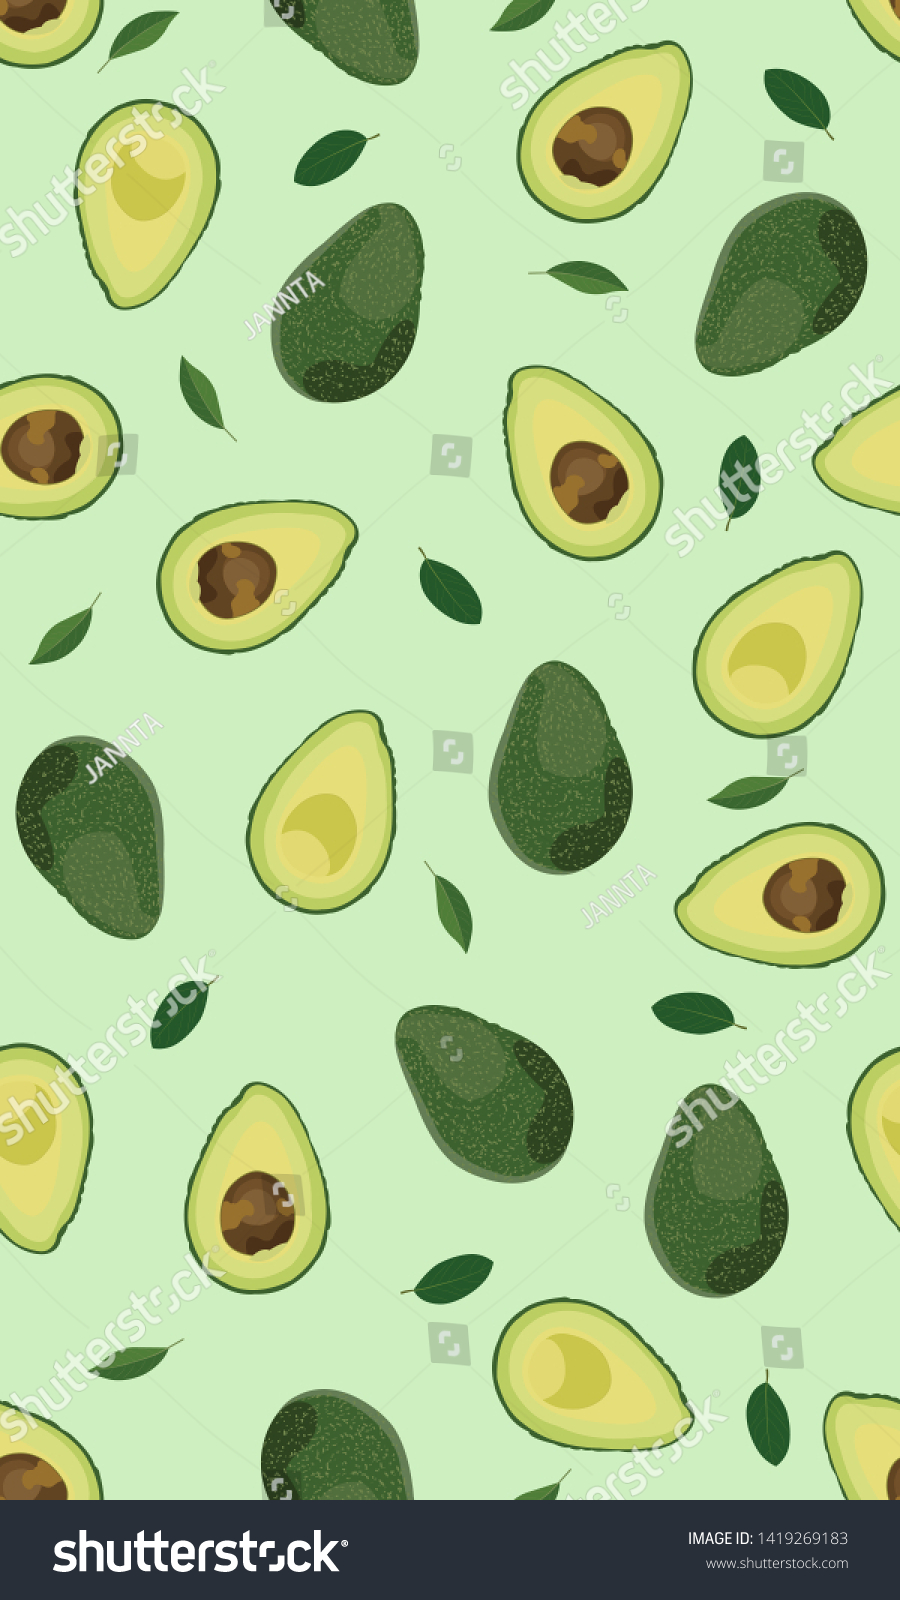 Seamless pattern whole and sliced avocado on bright green background, Vector illustration #1419269183